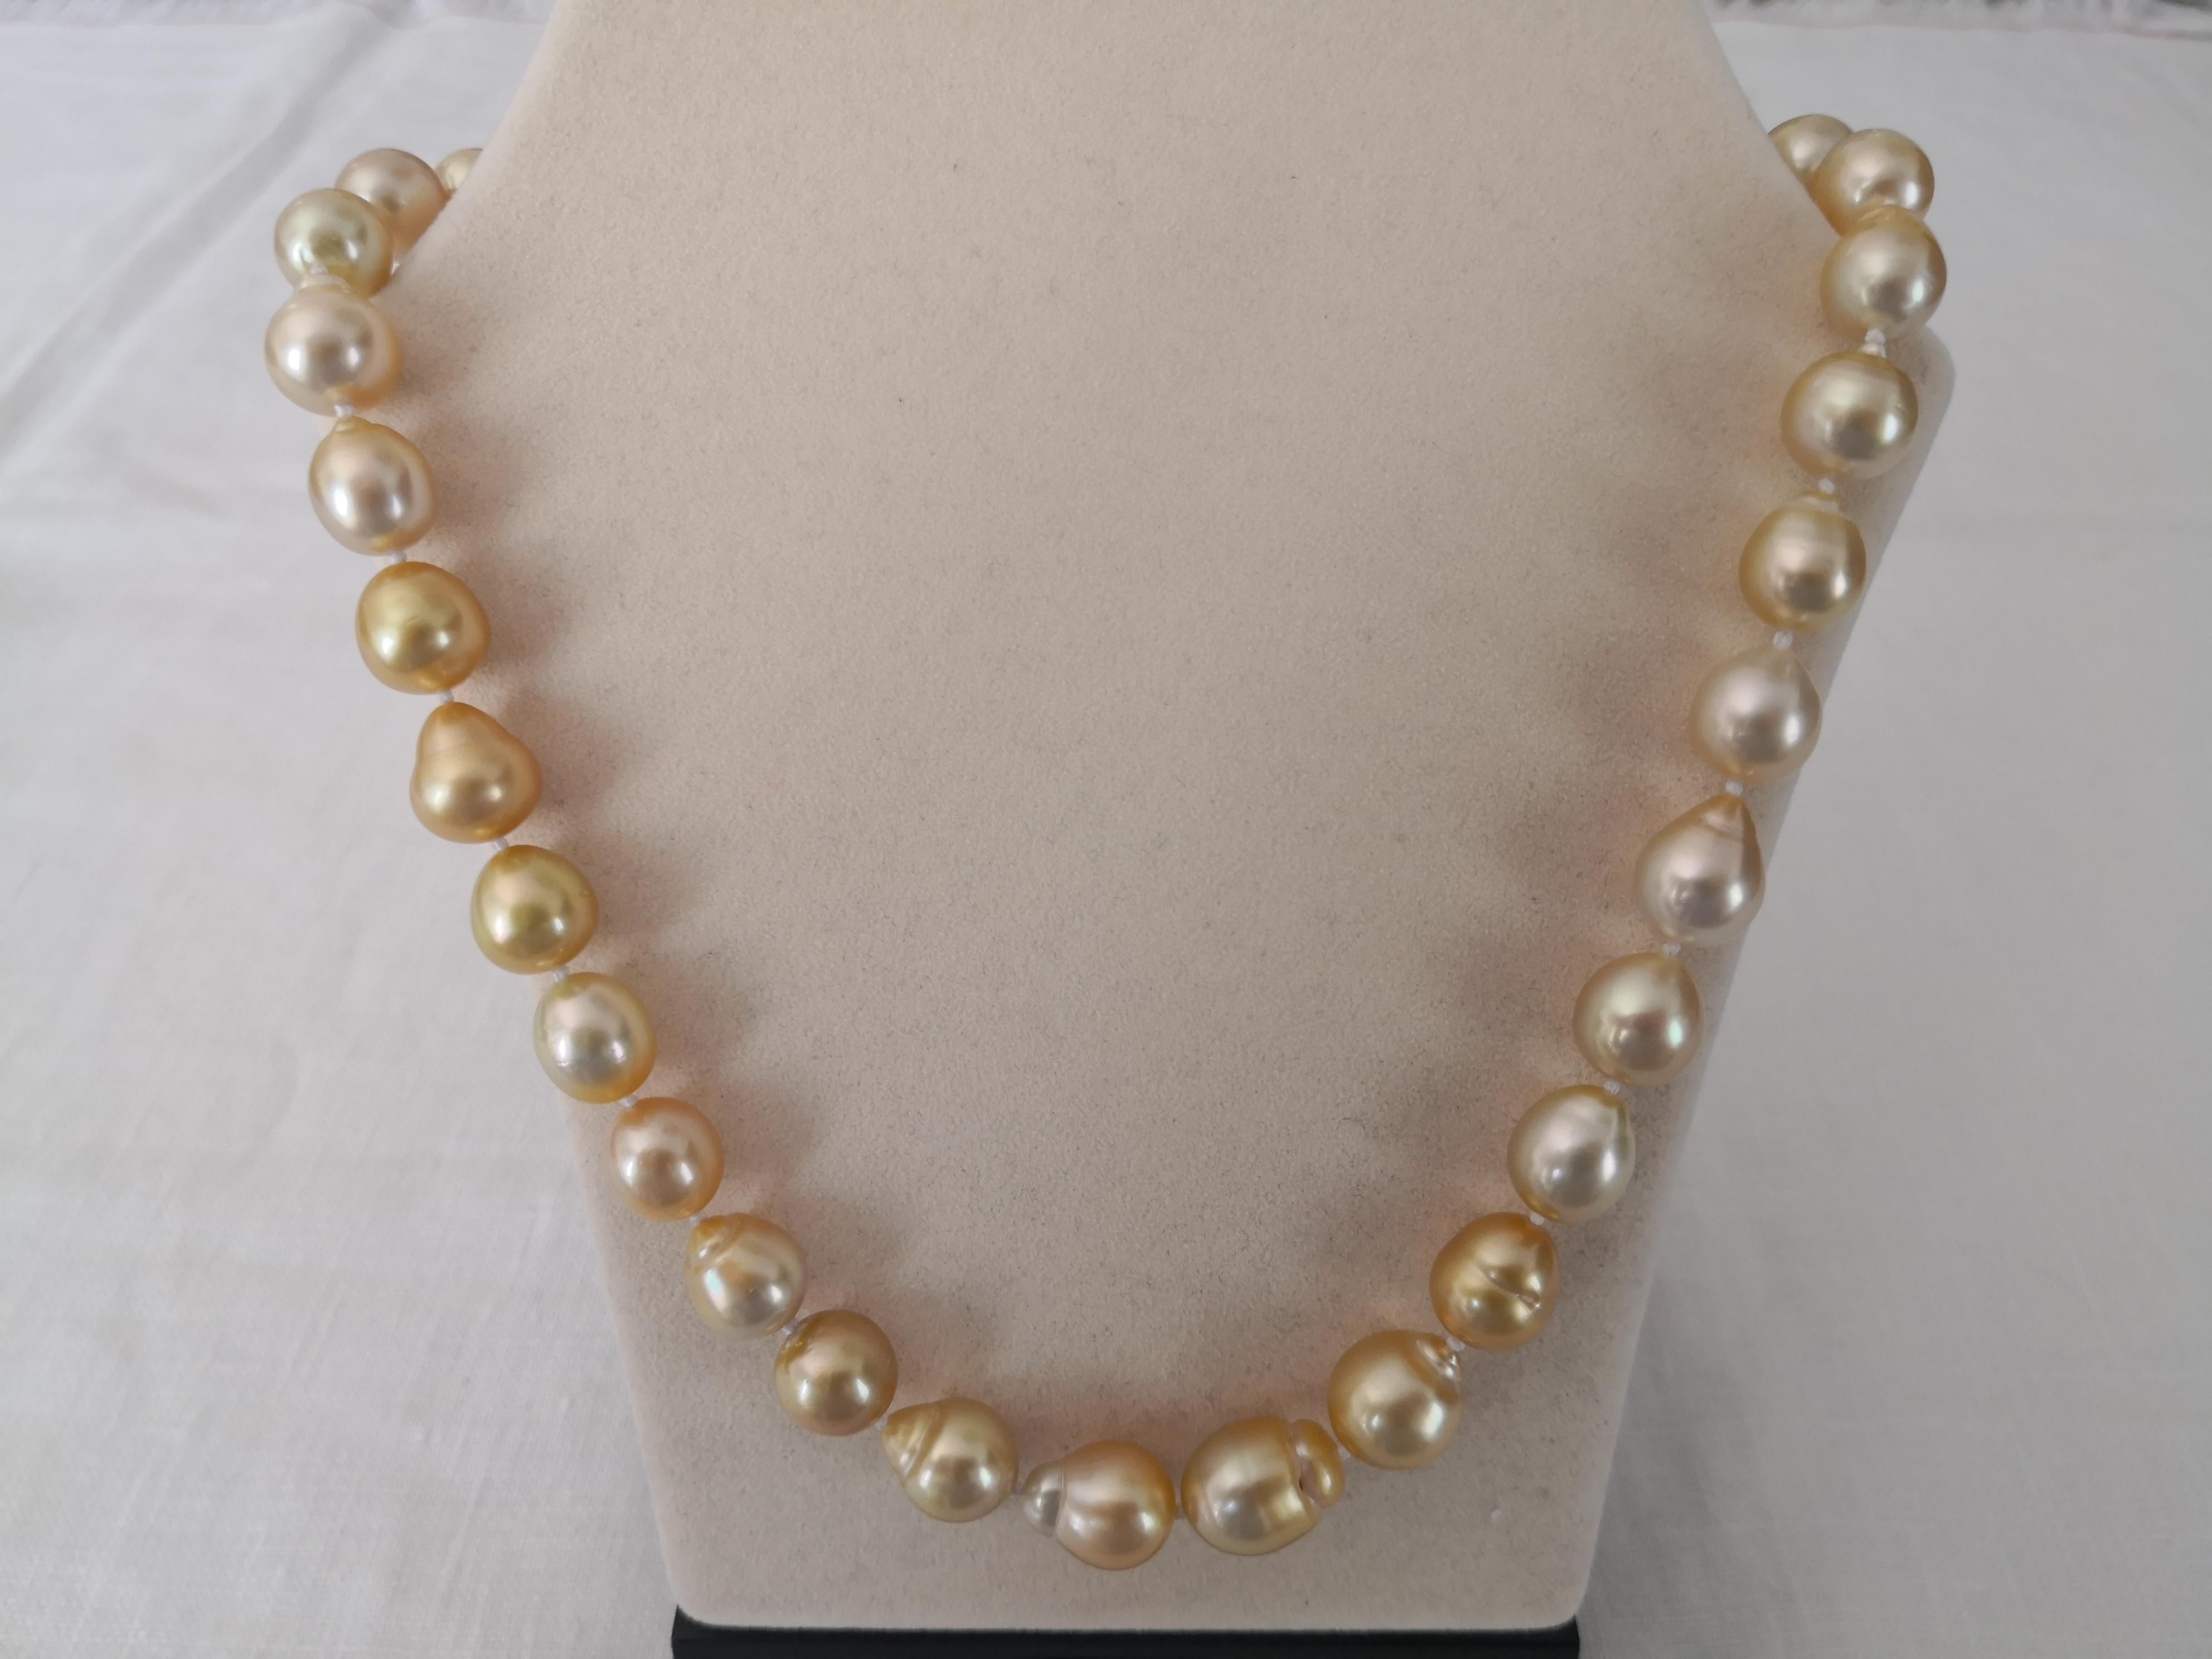 A Natural Color South Sea Pearls necklace

- Size of Pearls 10-13 mm of diameter

- Pearls from Pinctada Maxima Oyster

- Origin: Indonesia ocean waters

-  Natural Color Golden  pearls

-   High Natural luster and orient

-  Pearls of Oval and Drop